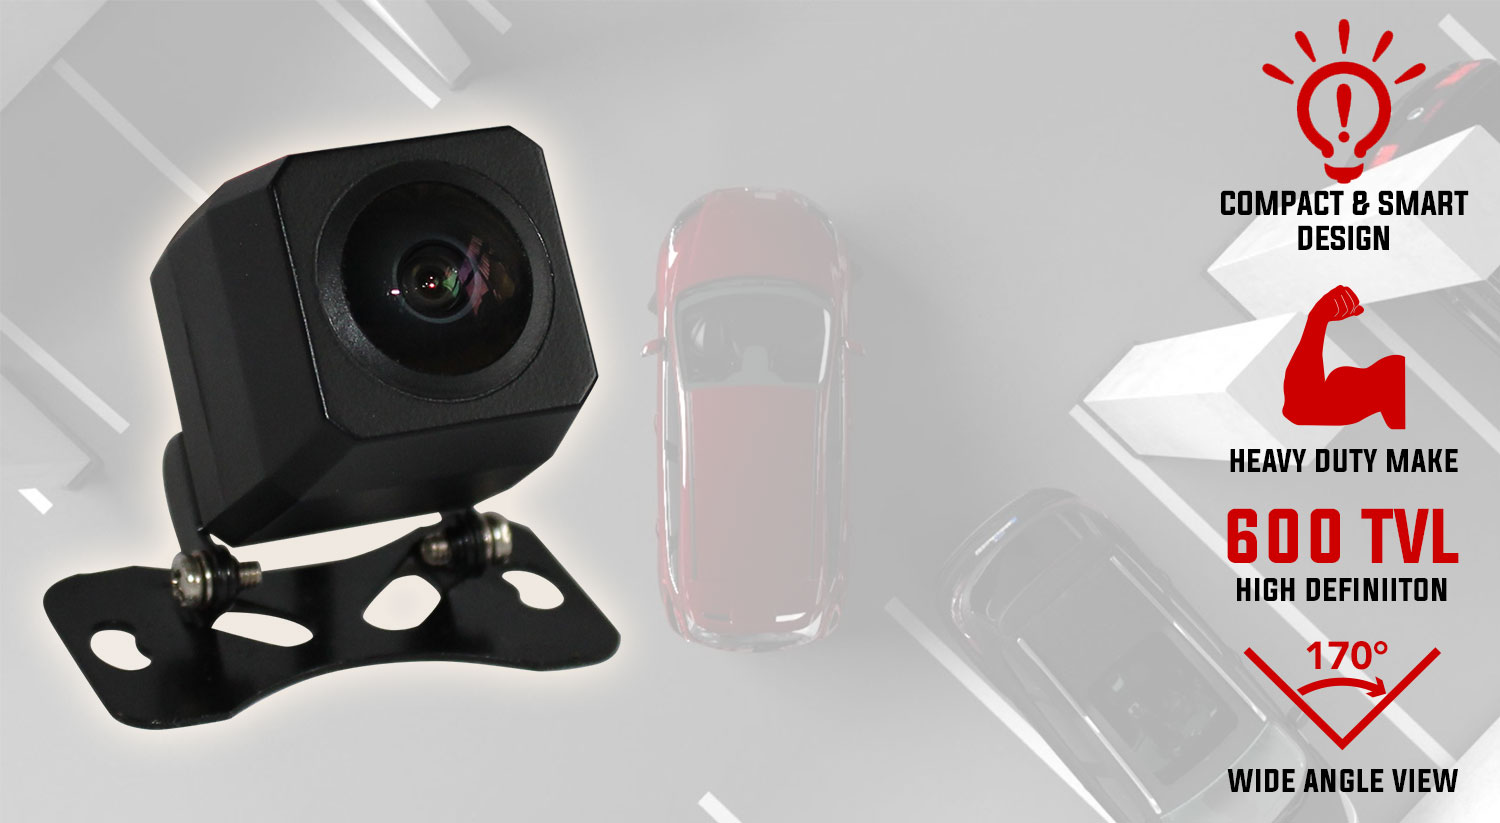 What makes a CMOS reversing camera effective